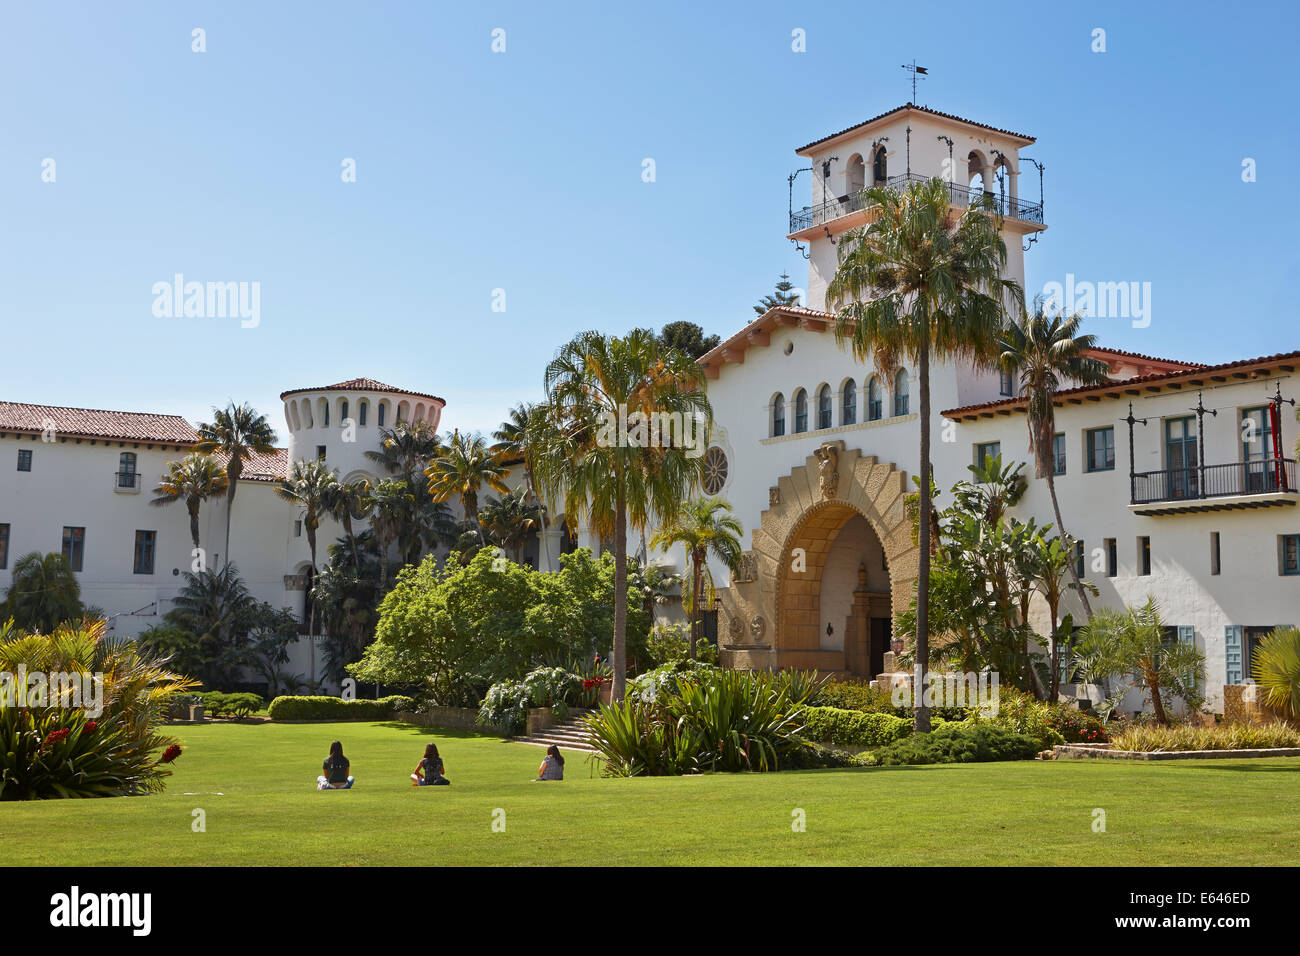 People sit on a neatly manicured green lawn in front of Santa Barbara County Courthouse. Santa Barbara, California, USA. Stock Photo